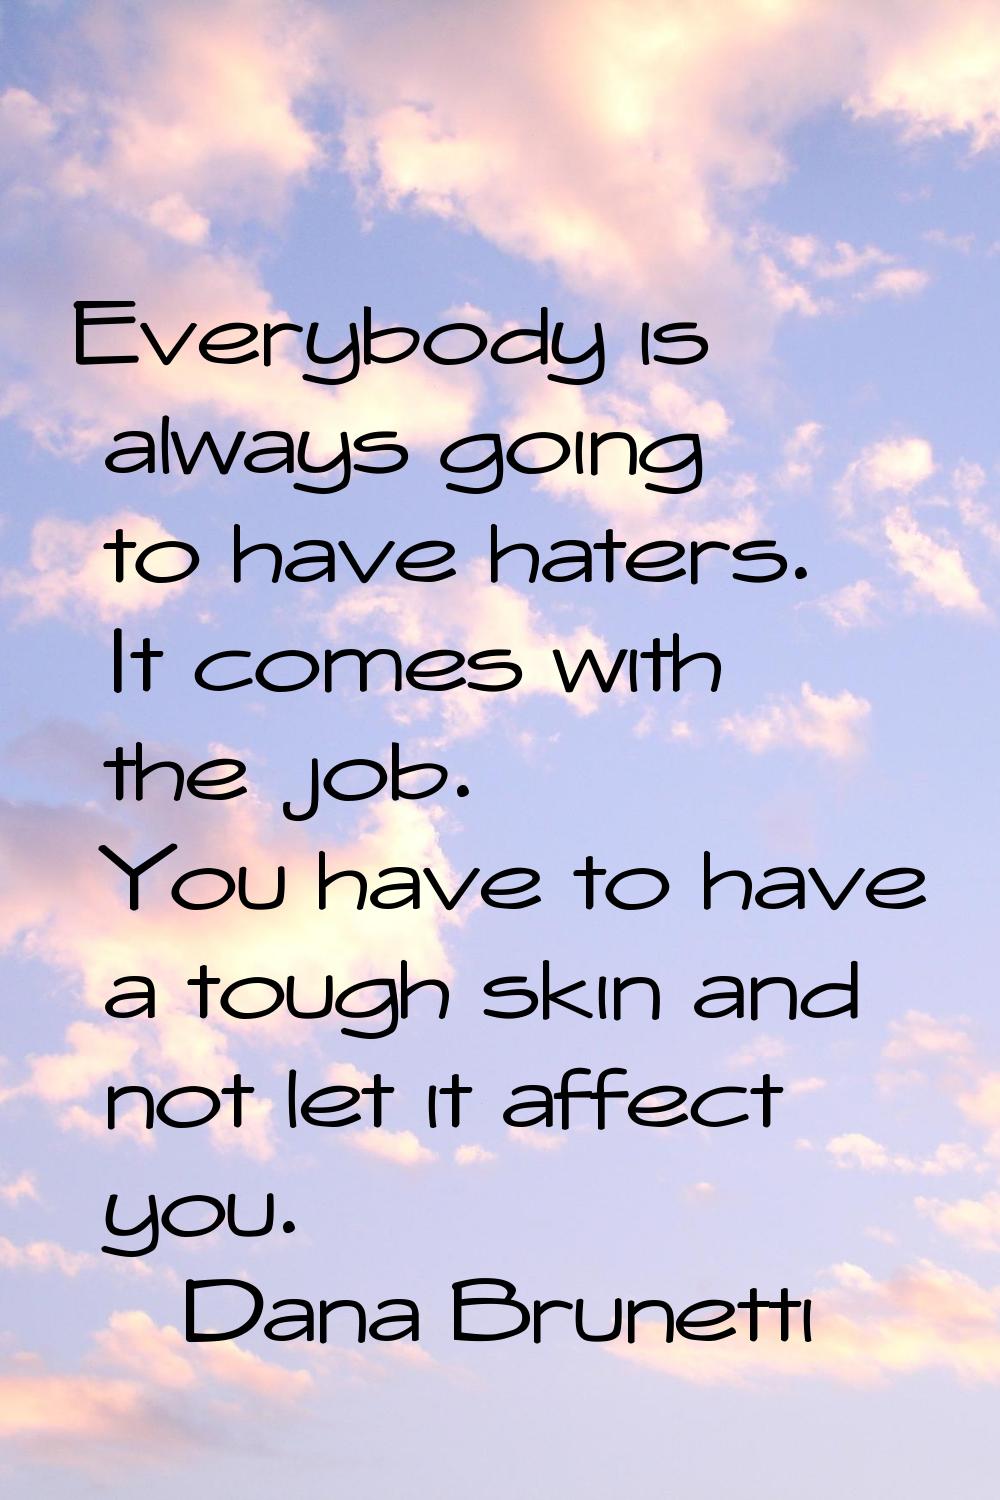 Everybody is always going to have haters. It comes with the job. You have to have a tough skin and 